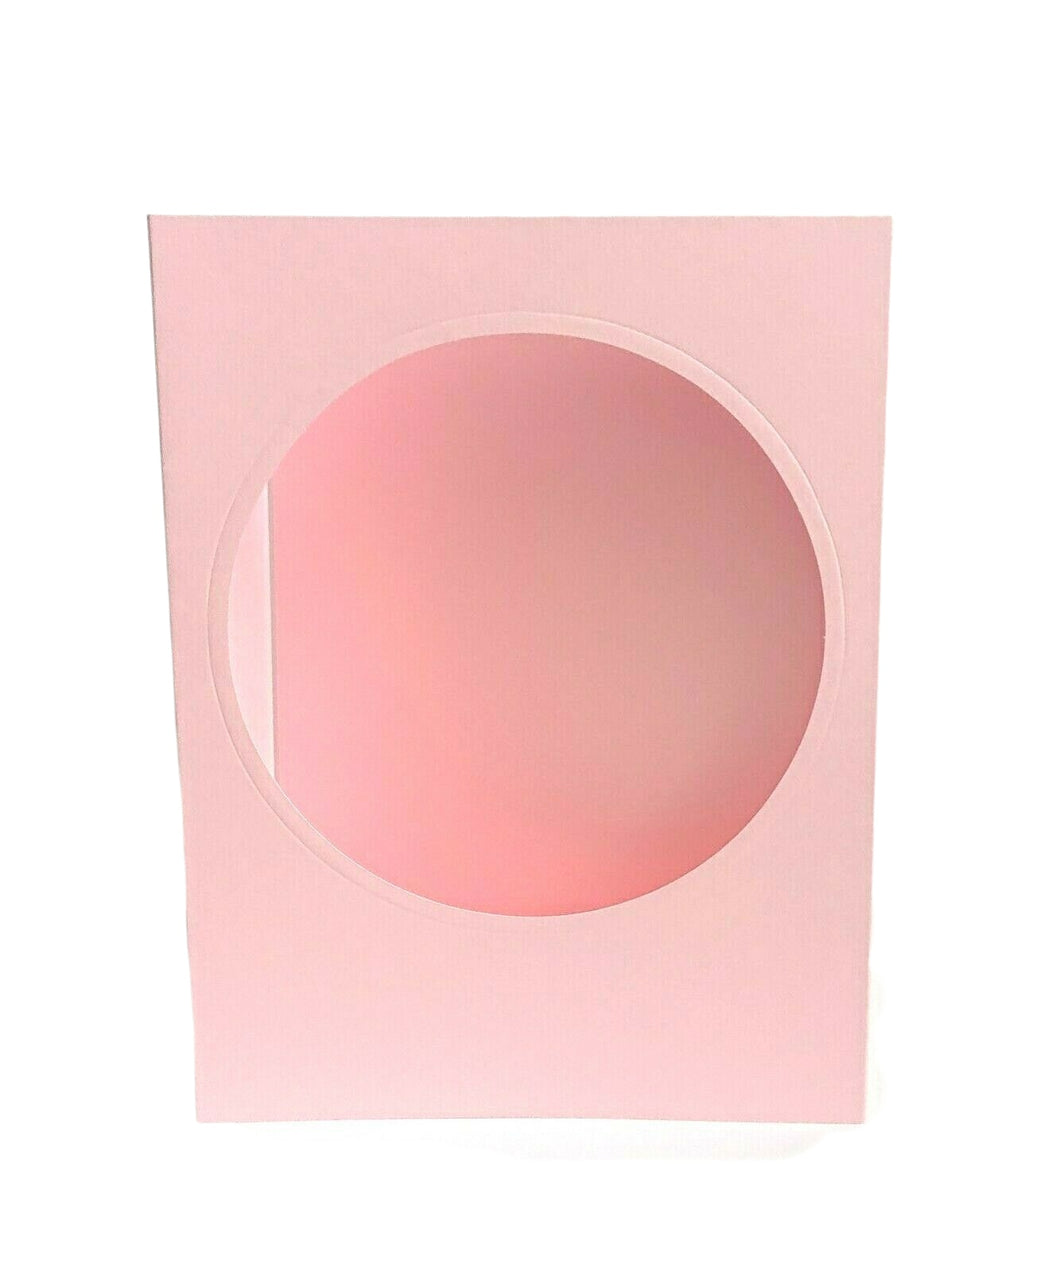 Trucraft - Pink Blank Circle Tri Fold A5 Aperture Cards with Envelopes - Pack of 5